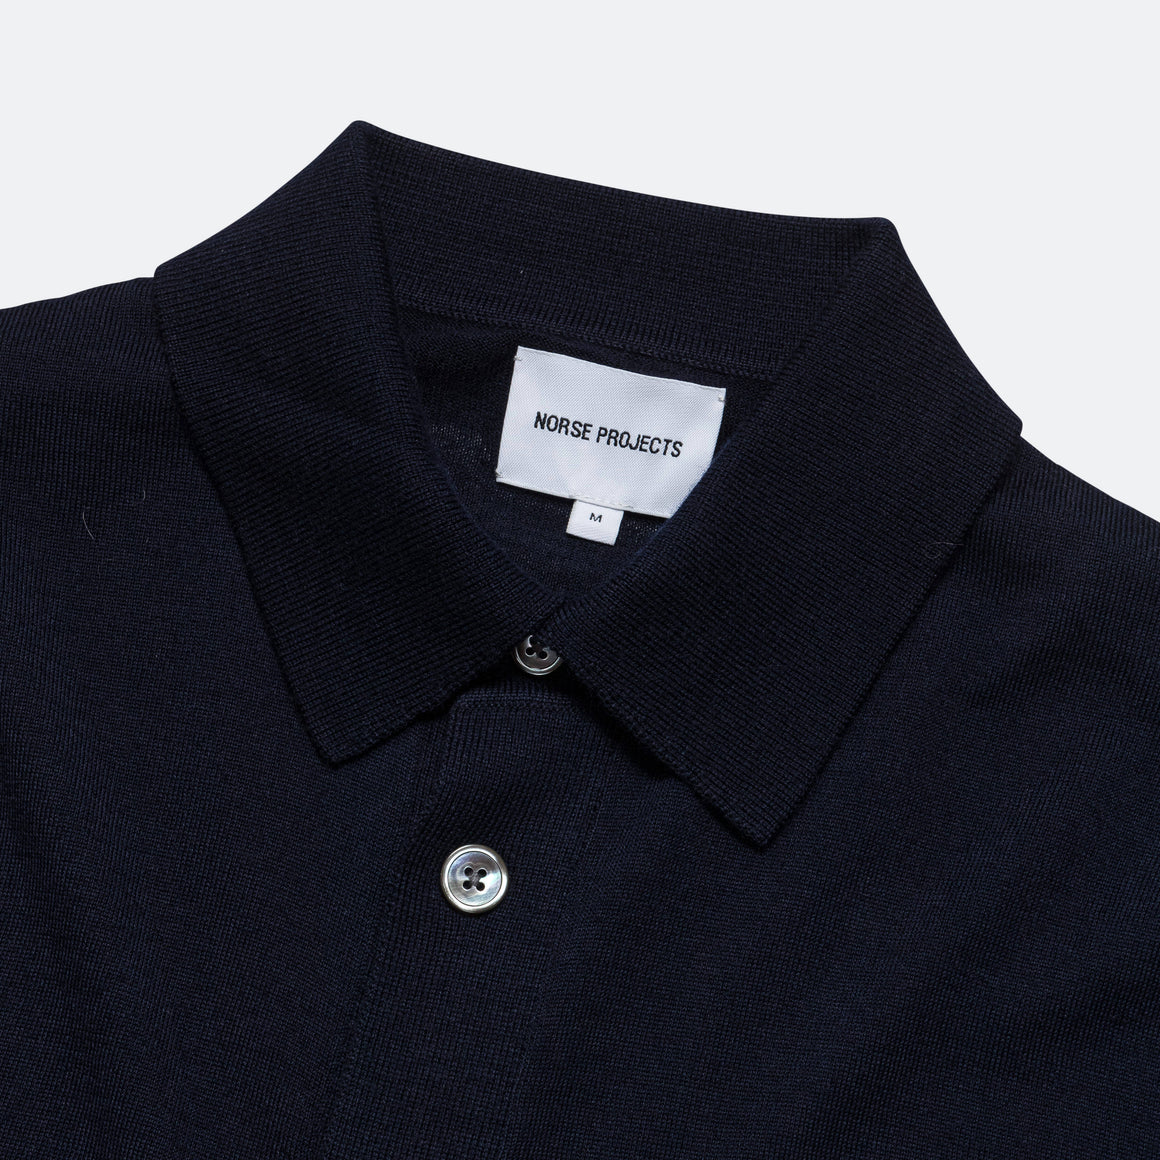 Norse Projects - Rollo Tech Merino Shirt - Dark Navy - UP THERE